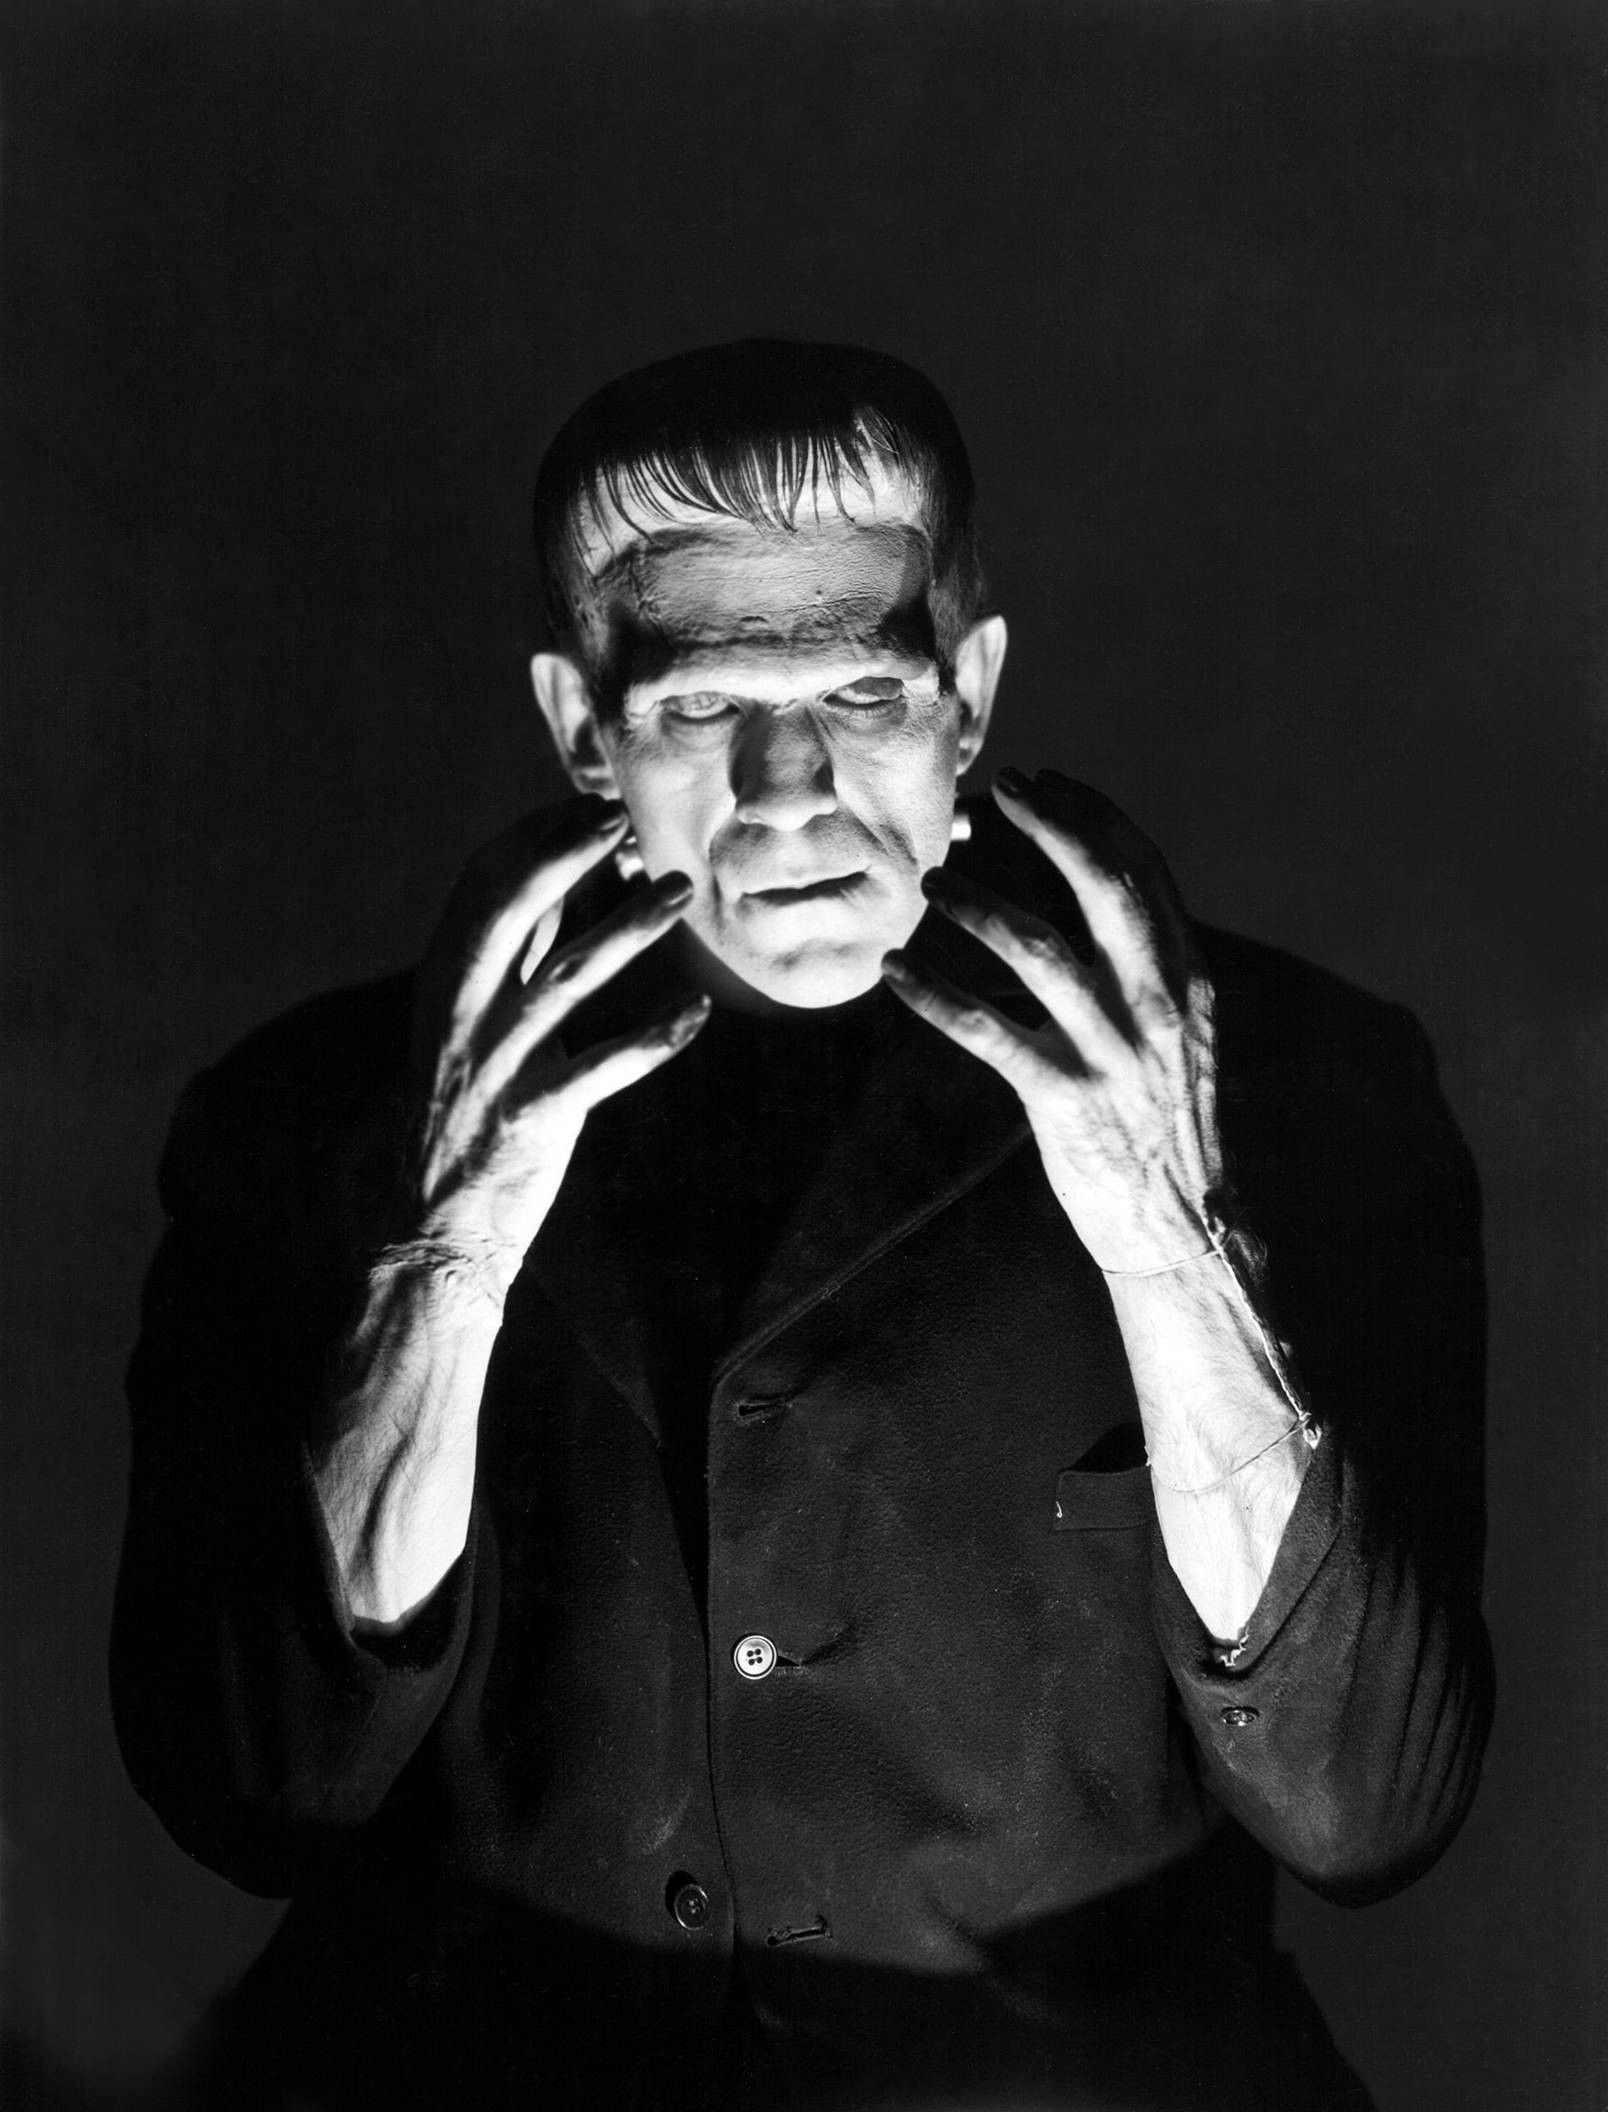 Classic Universal Monsters